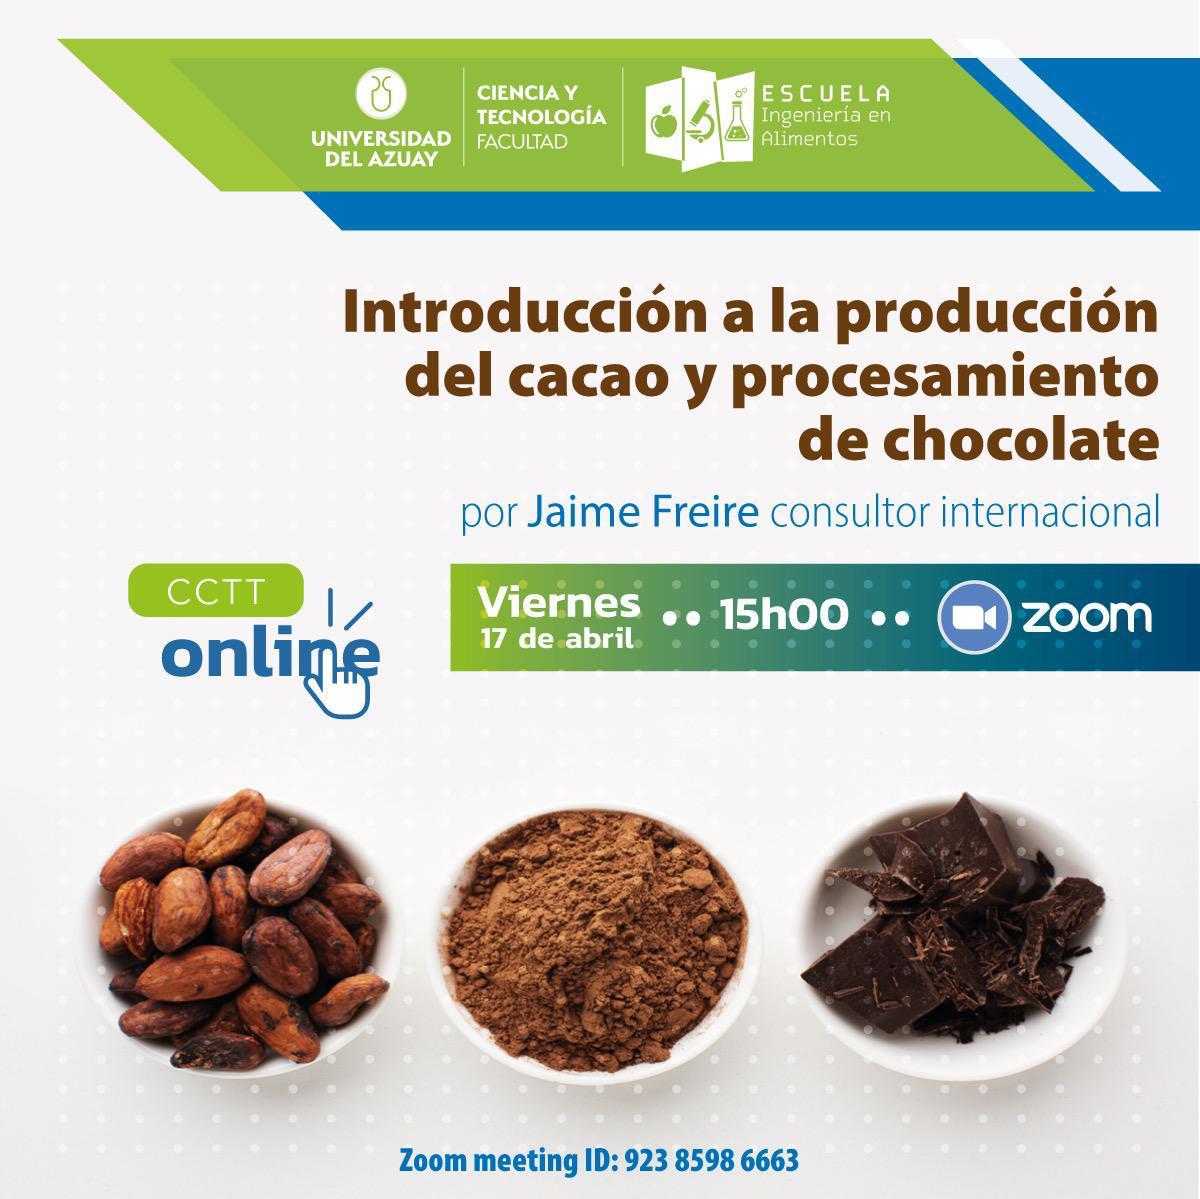 Introduction to cocoa production and chocolate processing